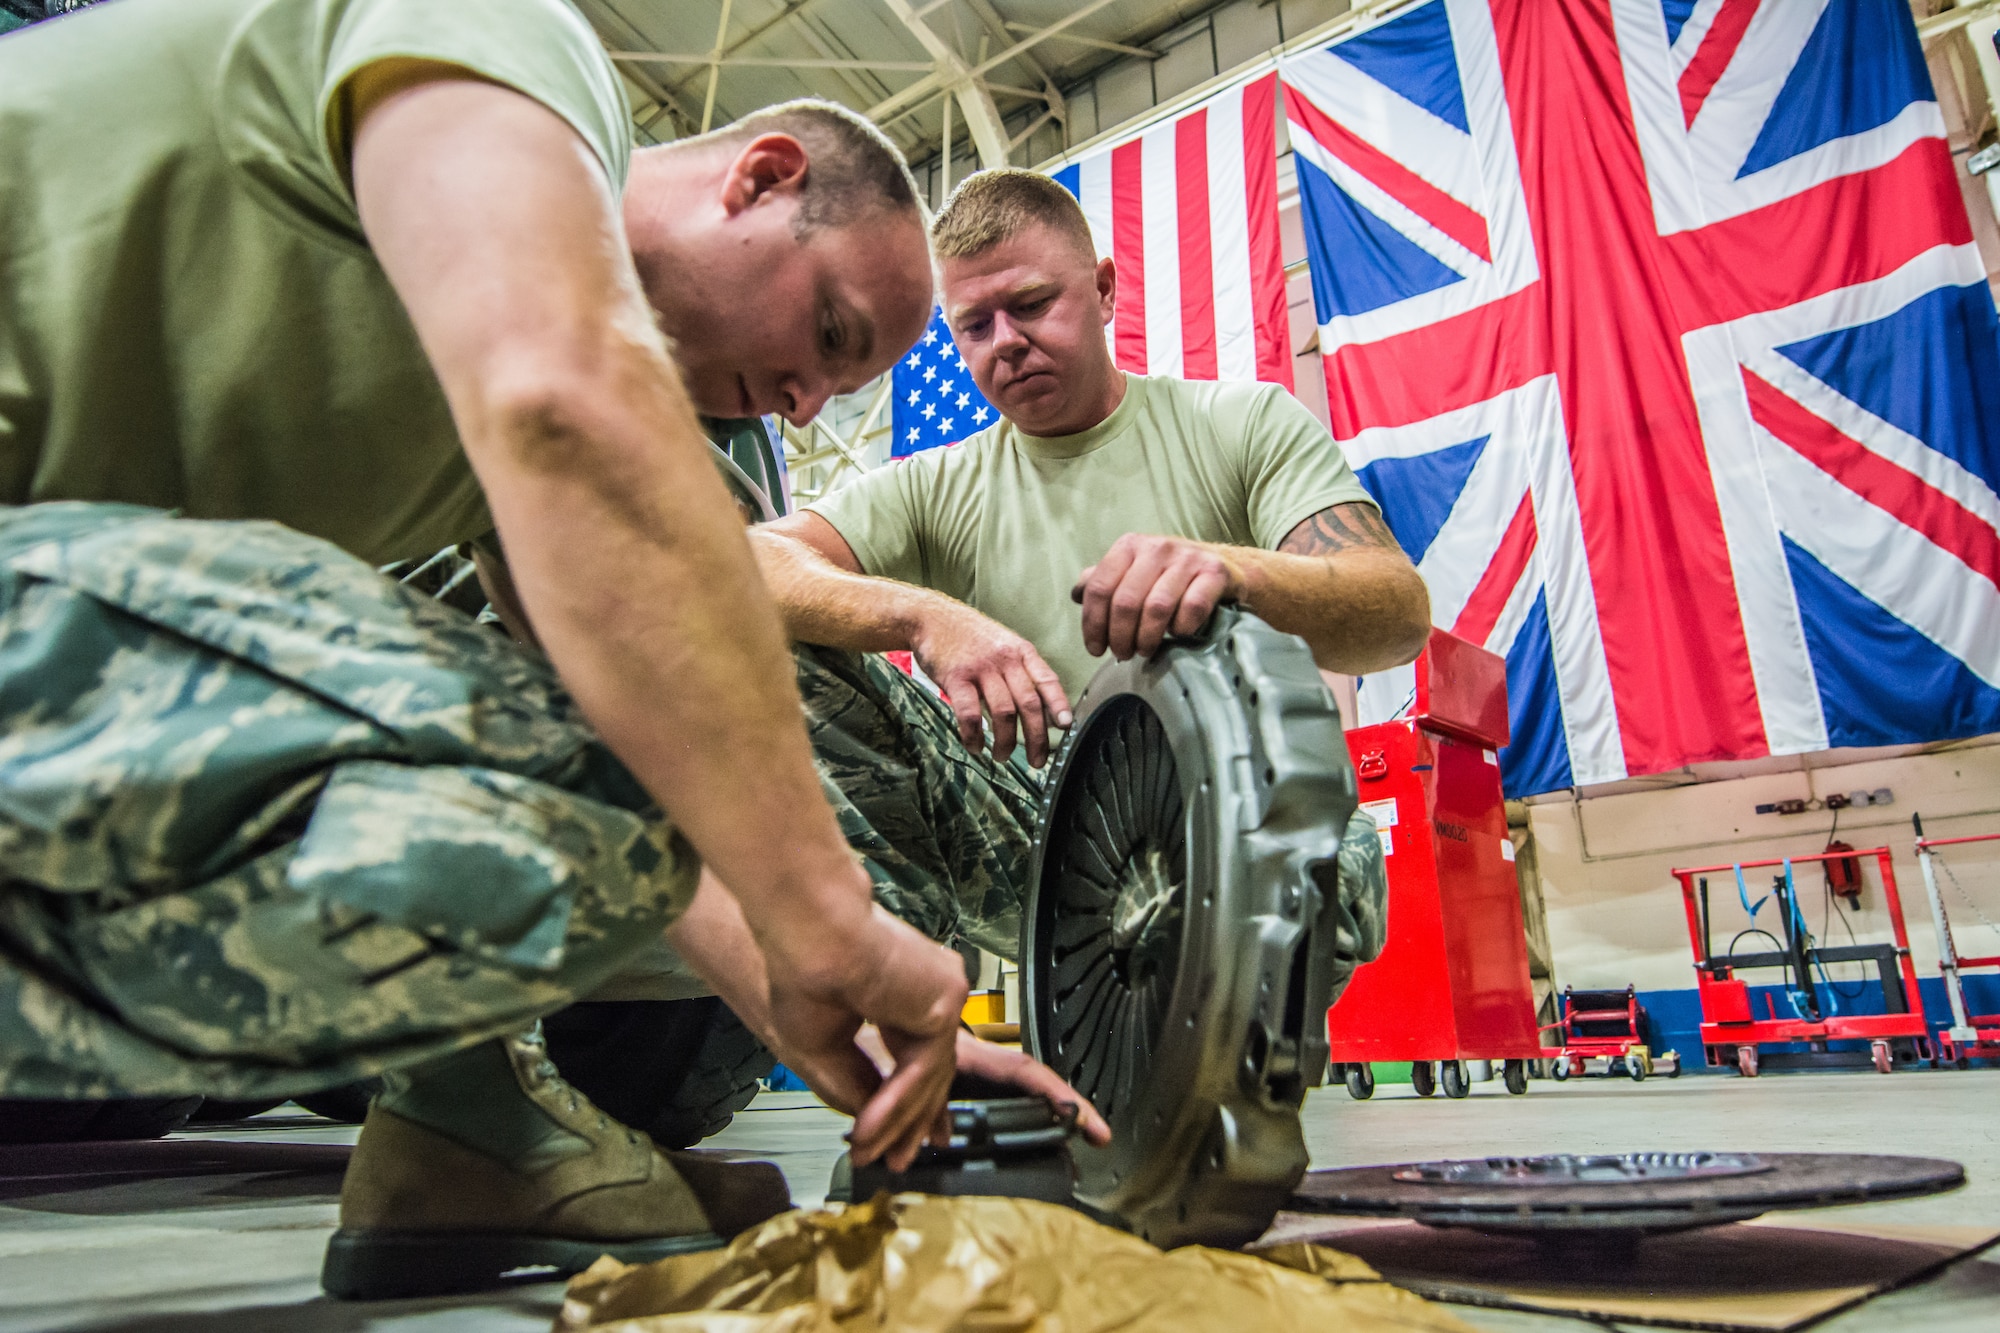 U.S. Air Force Tech Sgt. Brandon M. Guardado (left) and Staff Sgt. Cory C. Clary, with the 139th Logistics Readiness (139 LRS) Squadron replaces a clutch to a MAN 6x4 10-ton tractor at Royal Air Force Mildenhall, England, July 6, 2016.  The 139 LRS were conducting deployment field training in their respective career fields as part of annual training requirements.  (U.S Air National Guard photo by Senior Airman Patrick P. Evenson/Released)